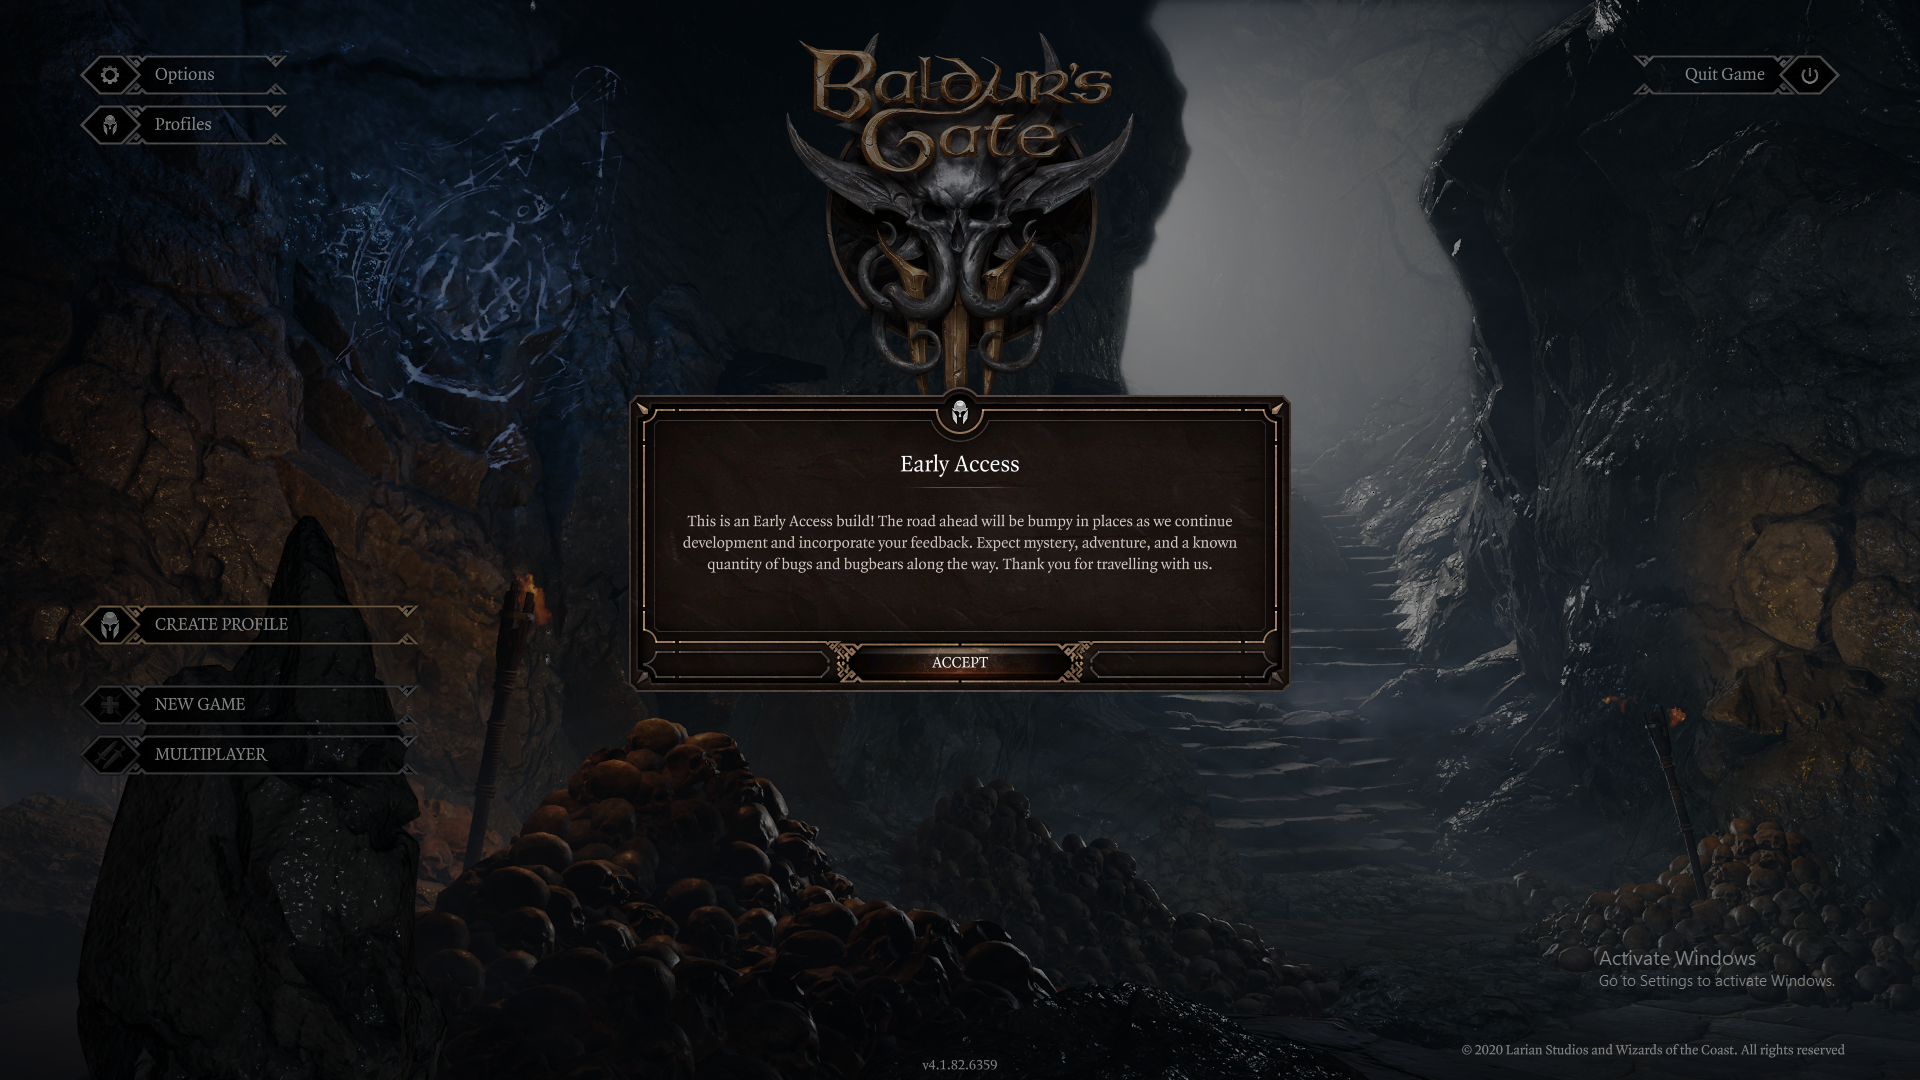 Why Baldur's Gate 3 is a game that will stay with you forever